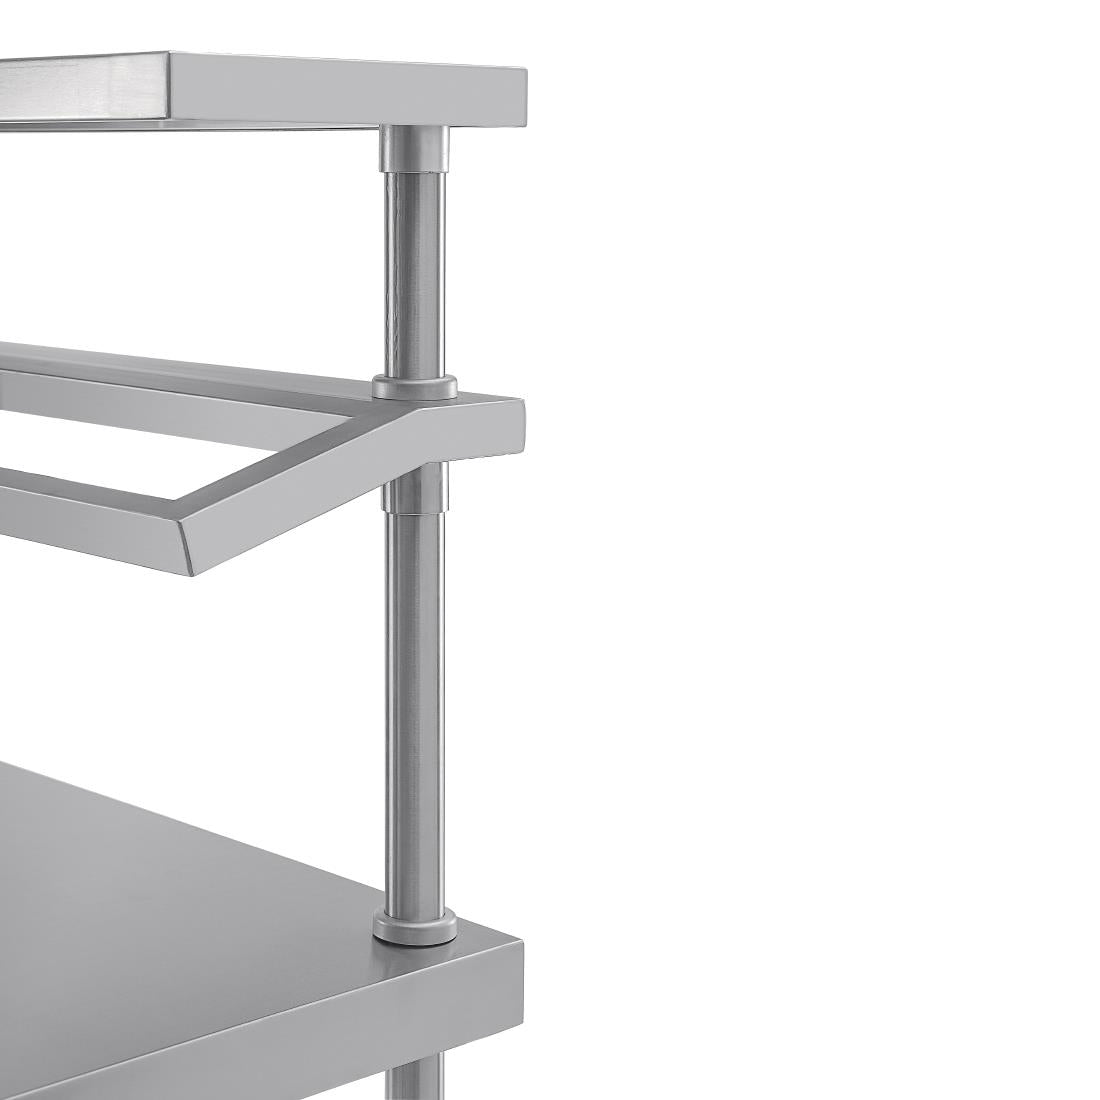 Vogue Stainless Steel Prep Station with Gantry